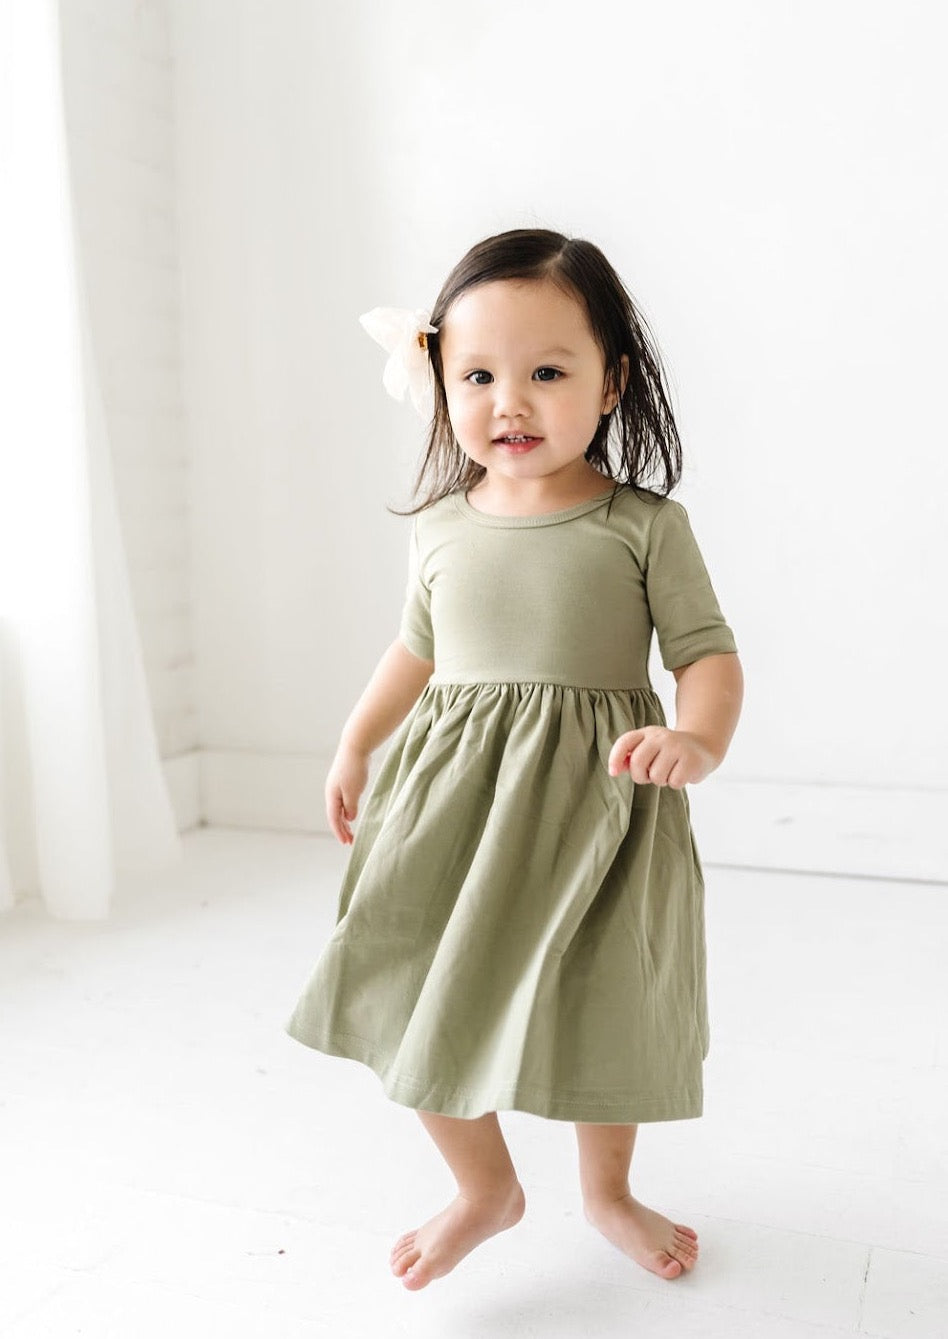 PLAY DRESS IN SAGE